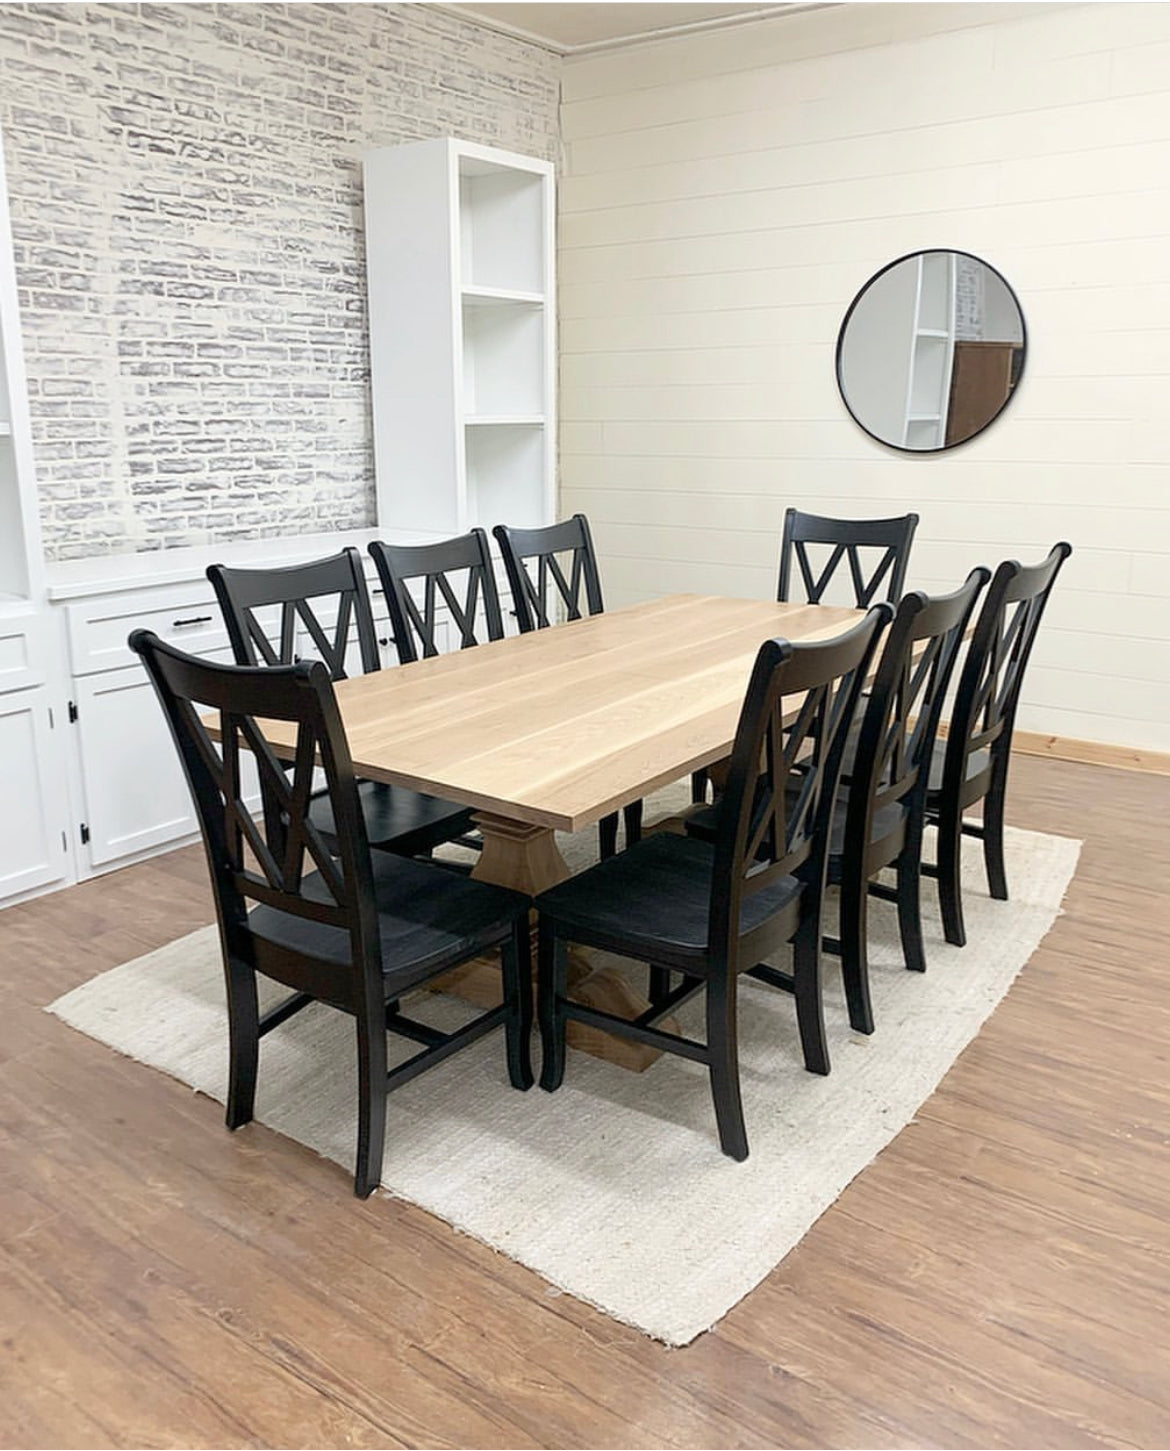 Pictured with a 8' L x 42" W White Oak table with a Natural Finish. Pictured are 8 Double Cross Back Chairs stained Black.